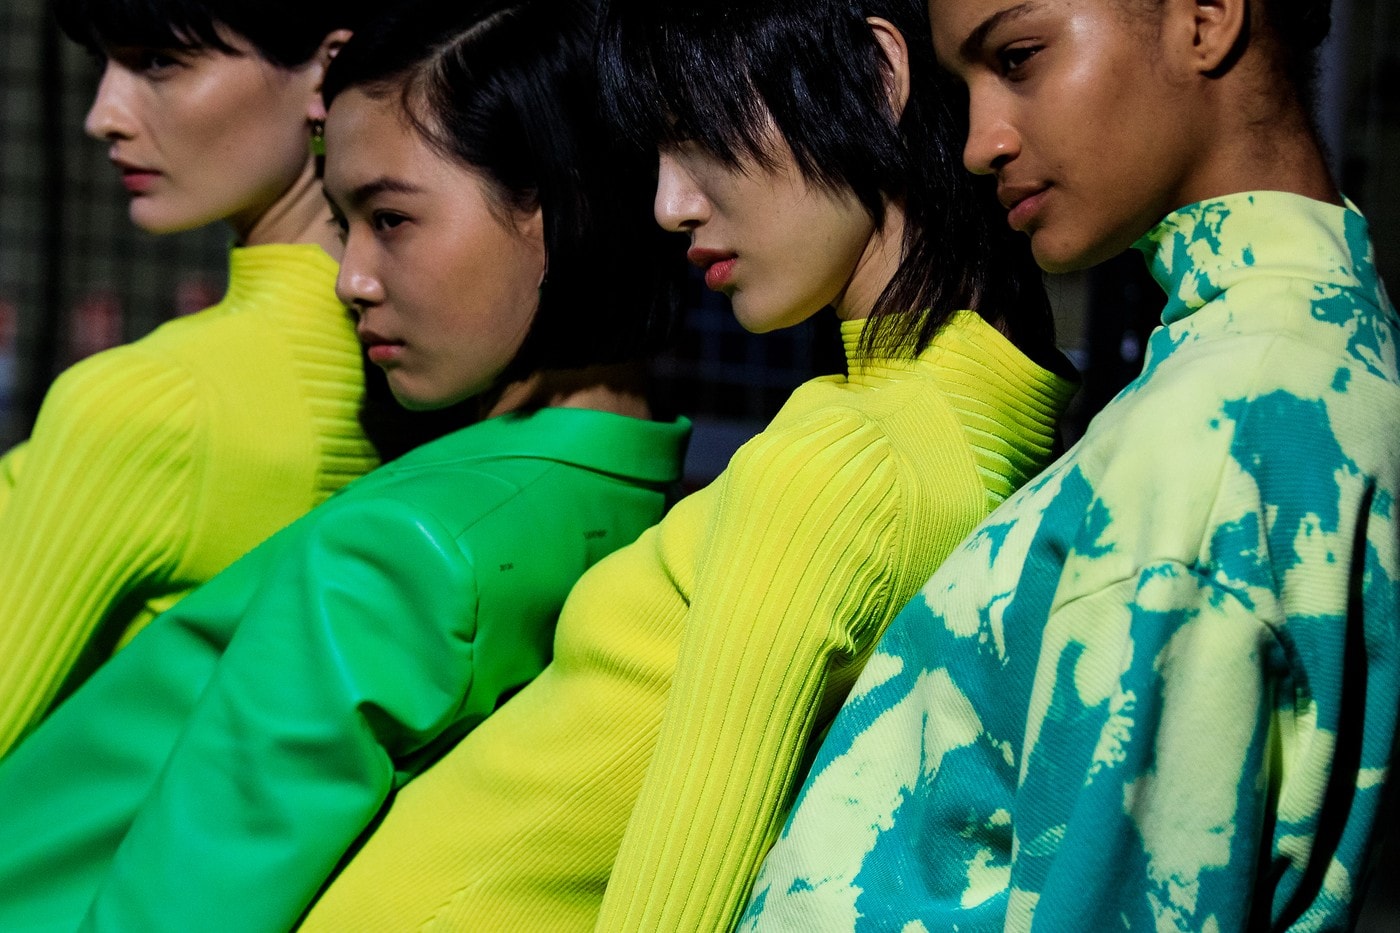 Off White Virgil Abloh Fall Winter 2019 Paris Fashion Week Show Collection Sweaters Yellow Green Black